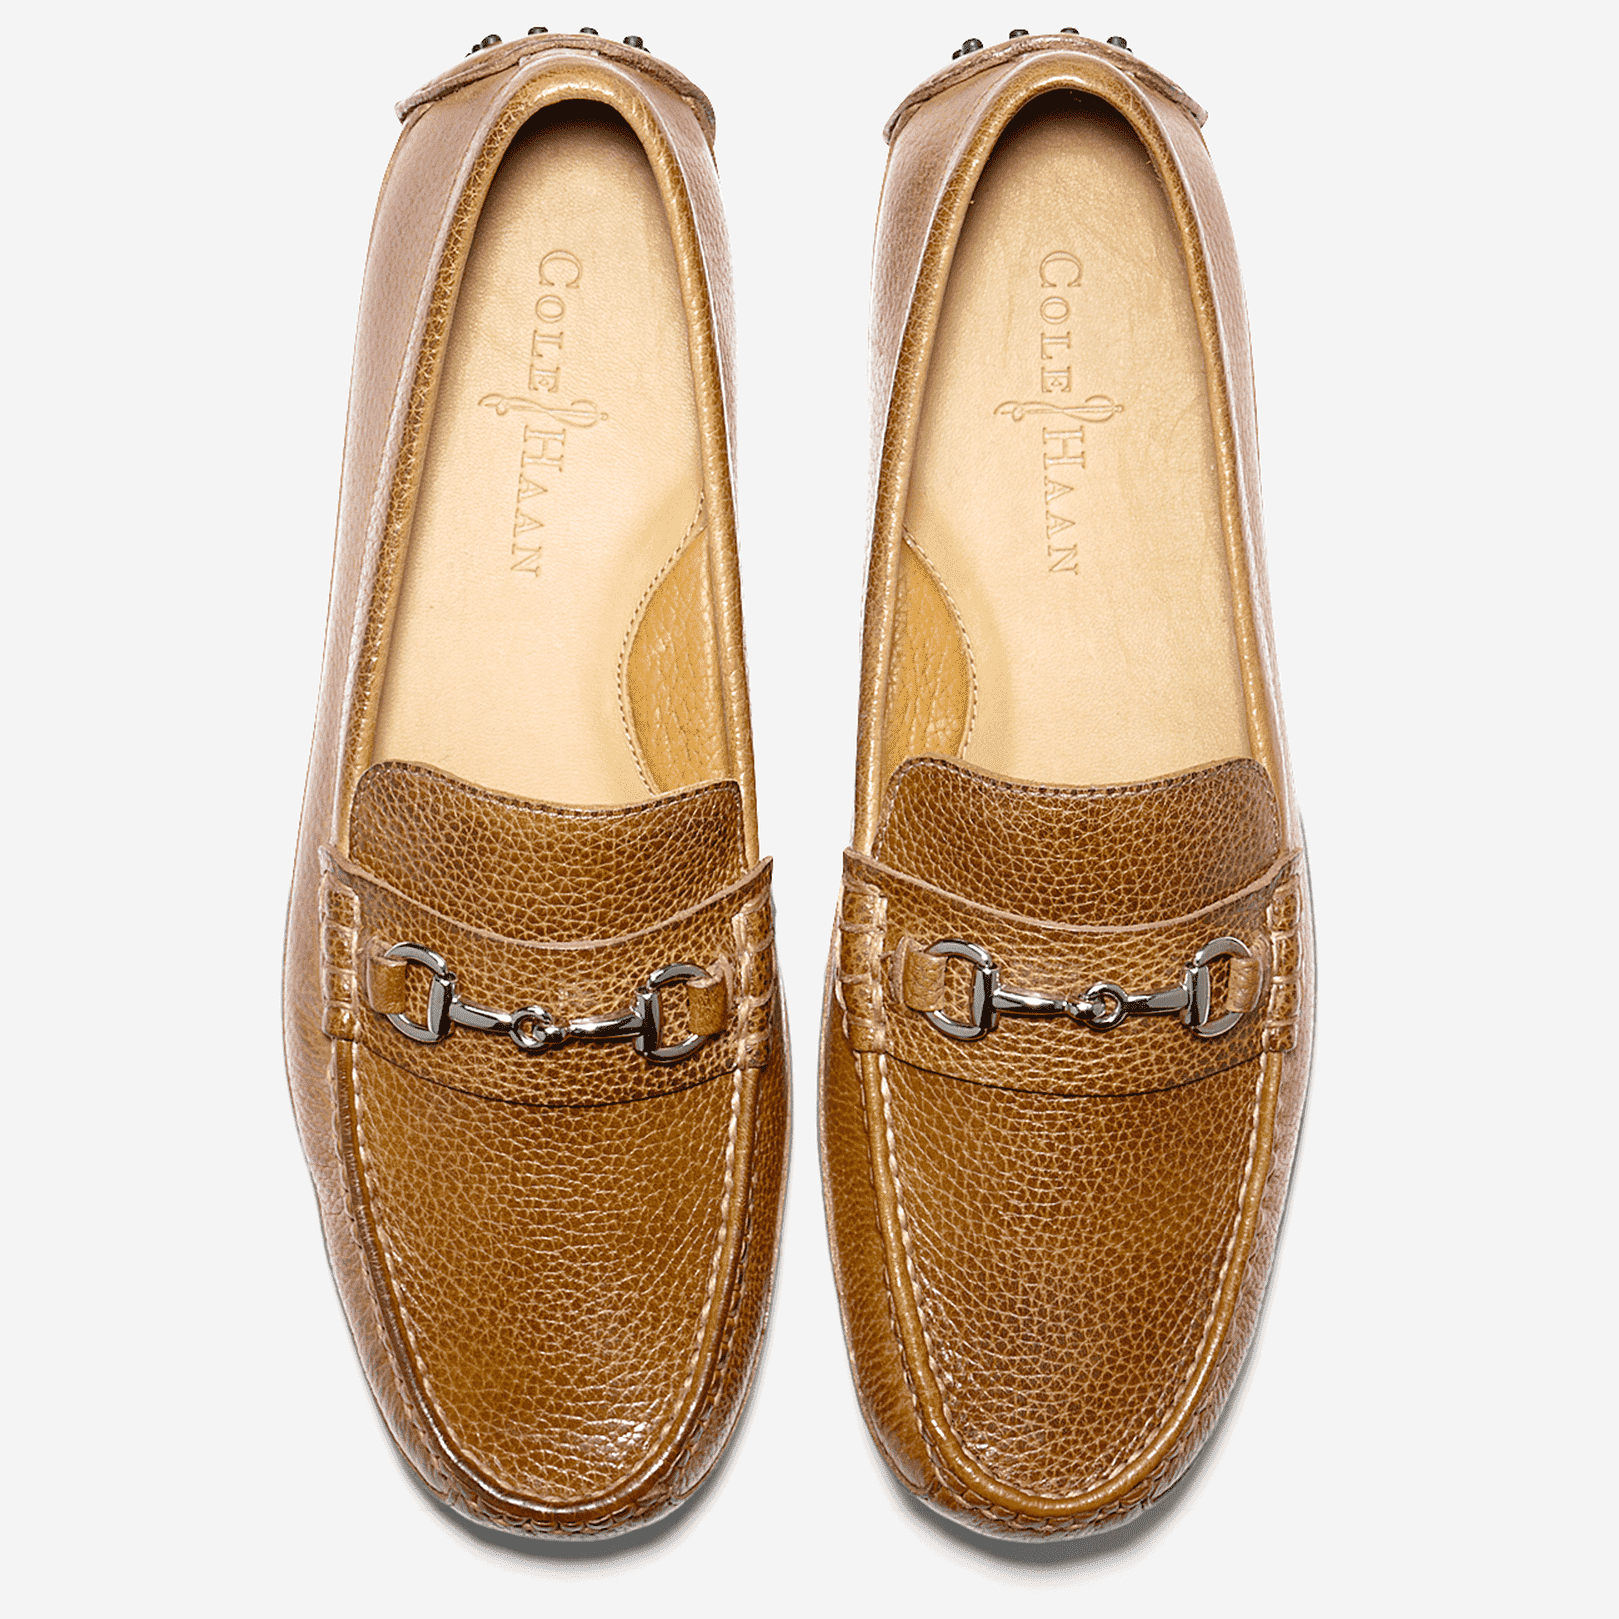 Men's Grant Canoe Bit Loafer in Tan by Cole Haan - Country Club Prep